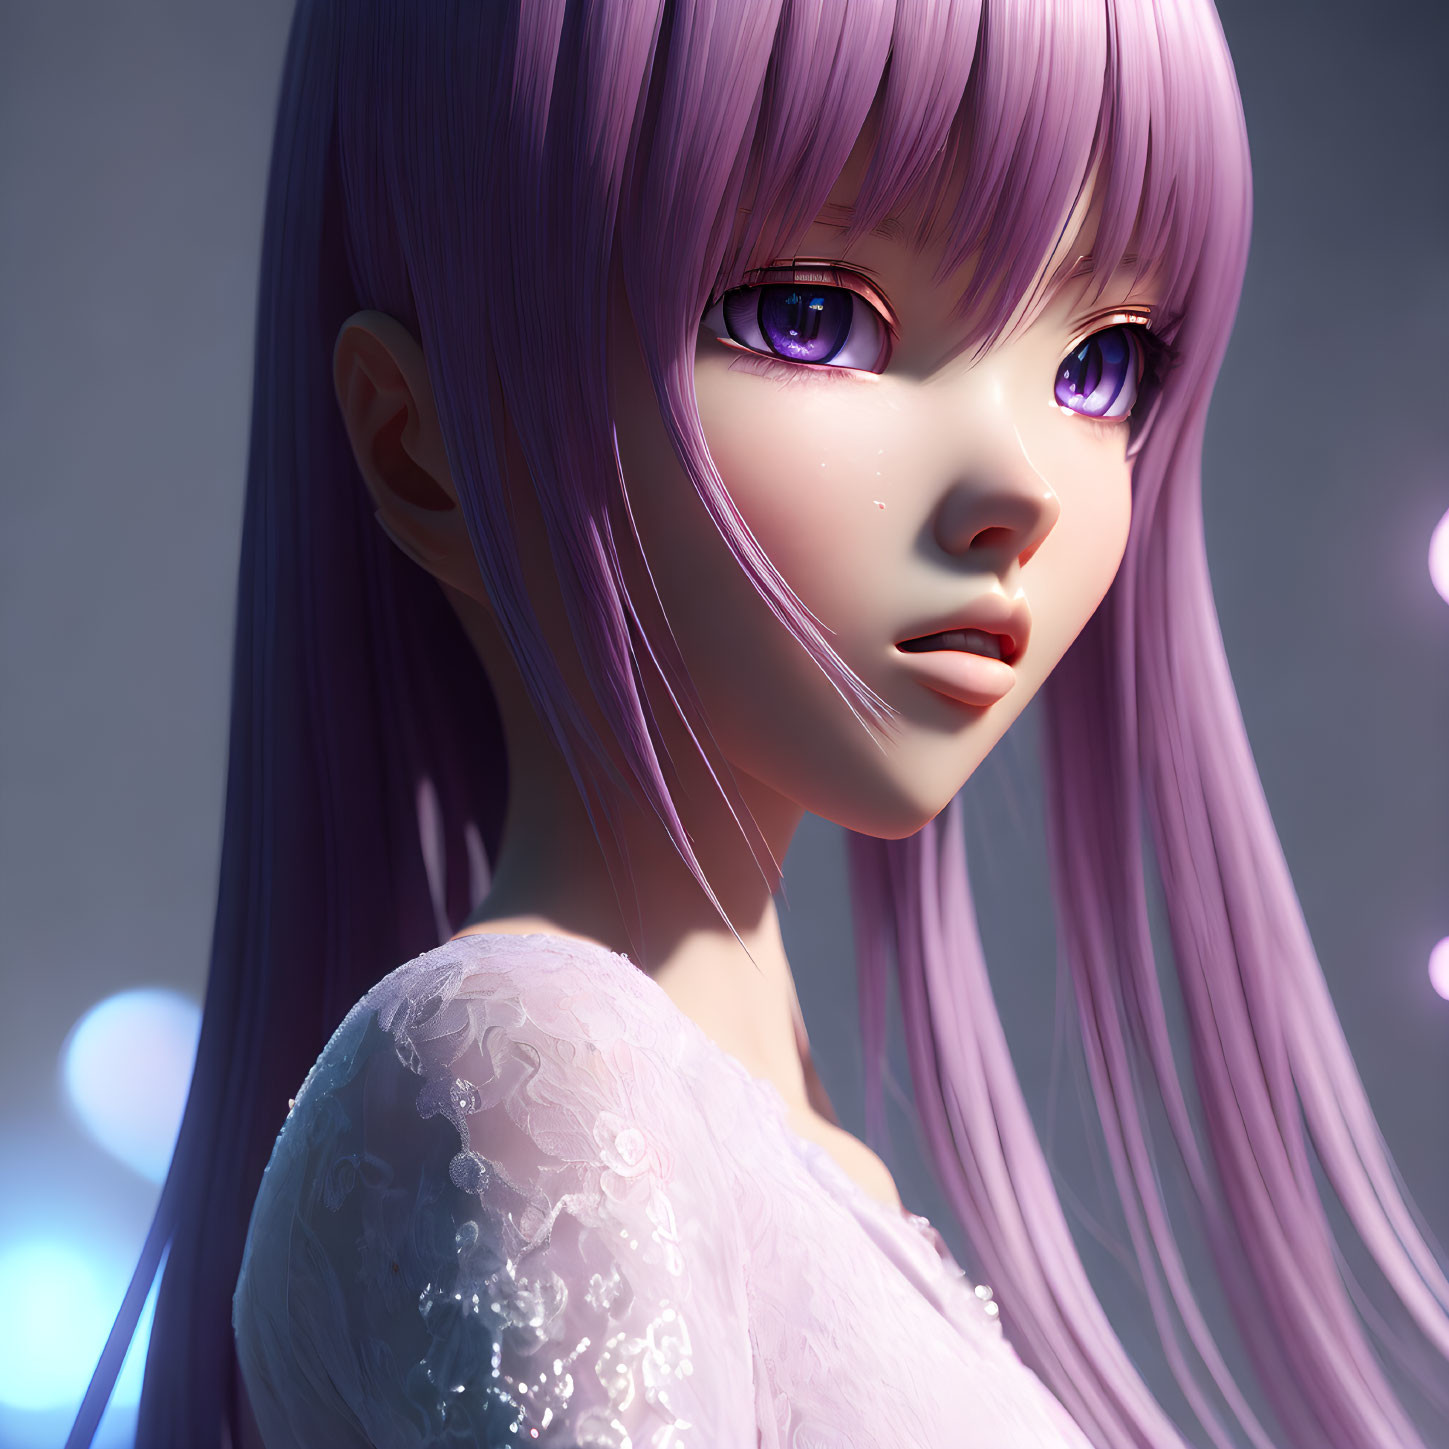 Purple-haired animated character with lace top in cool-toned background